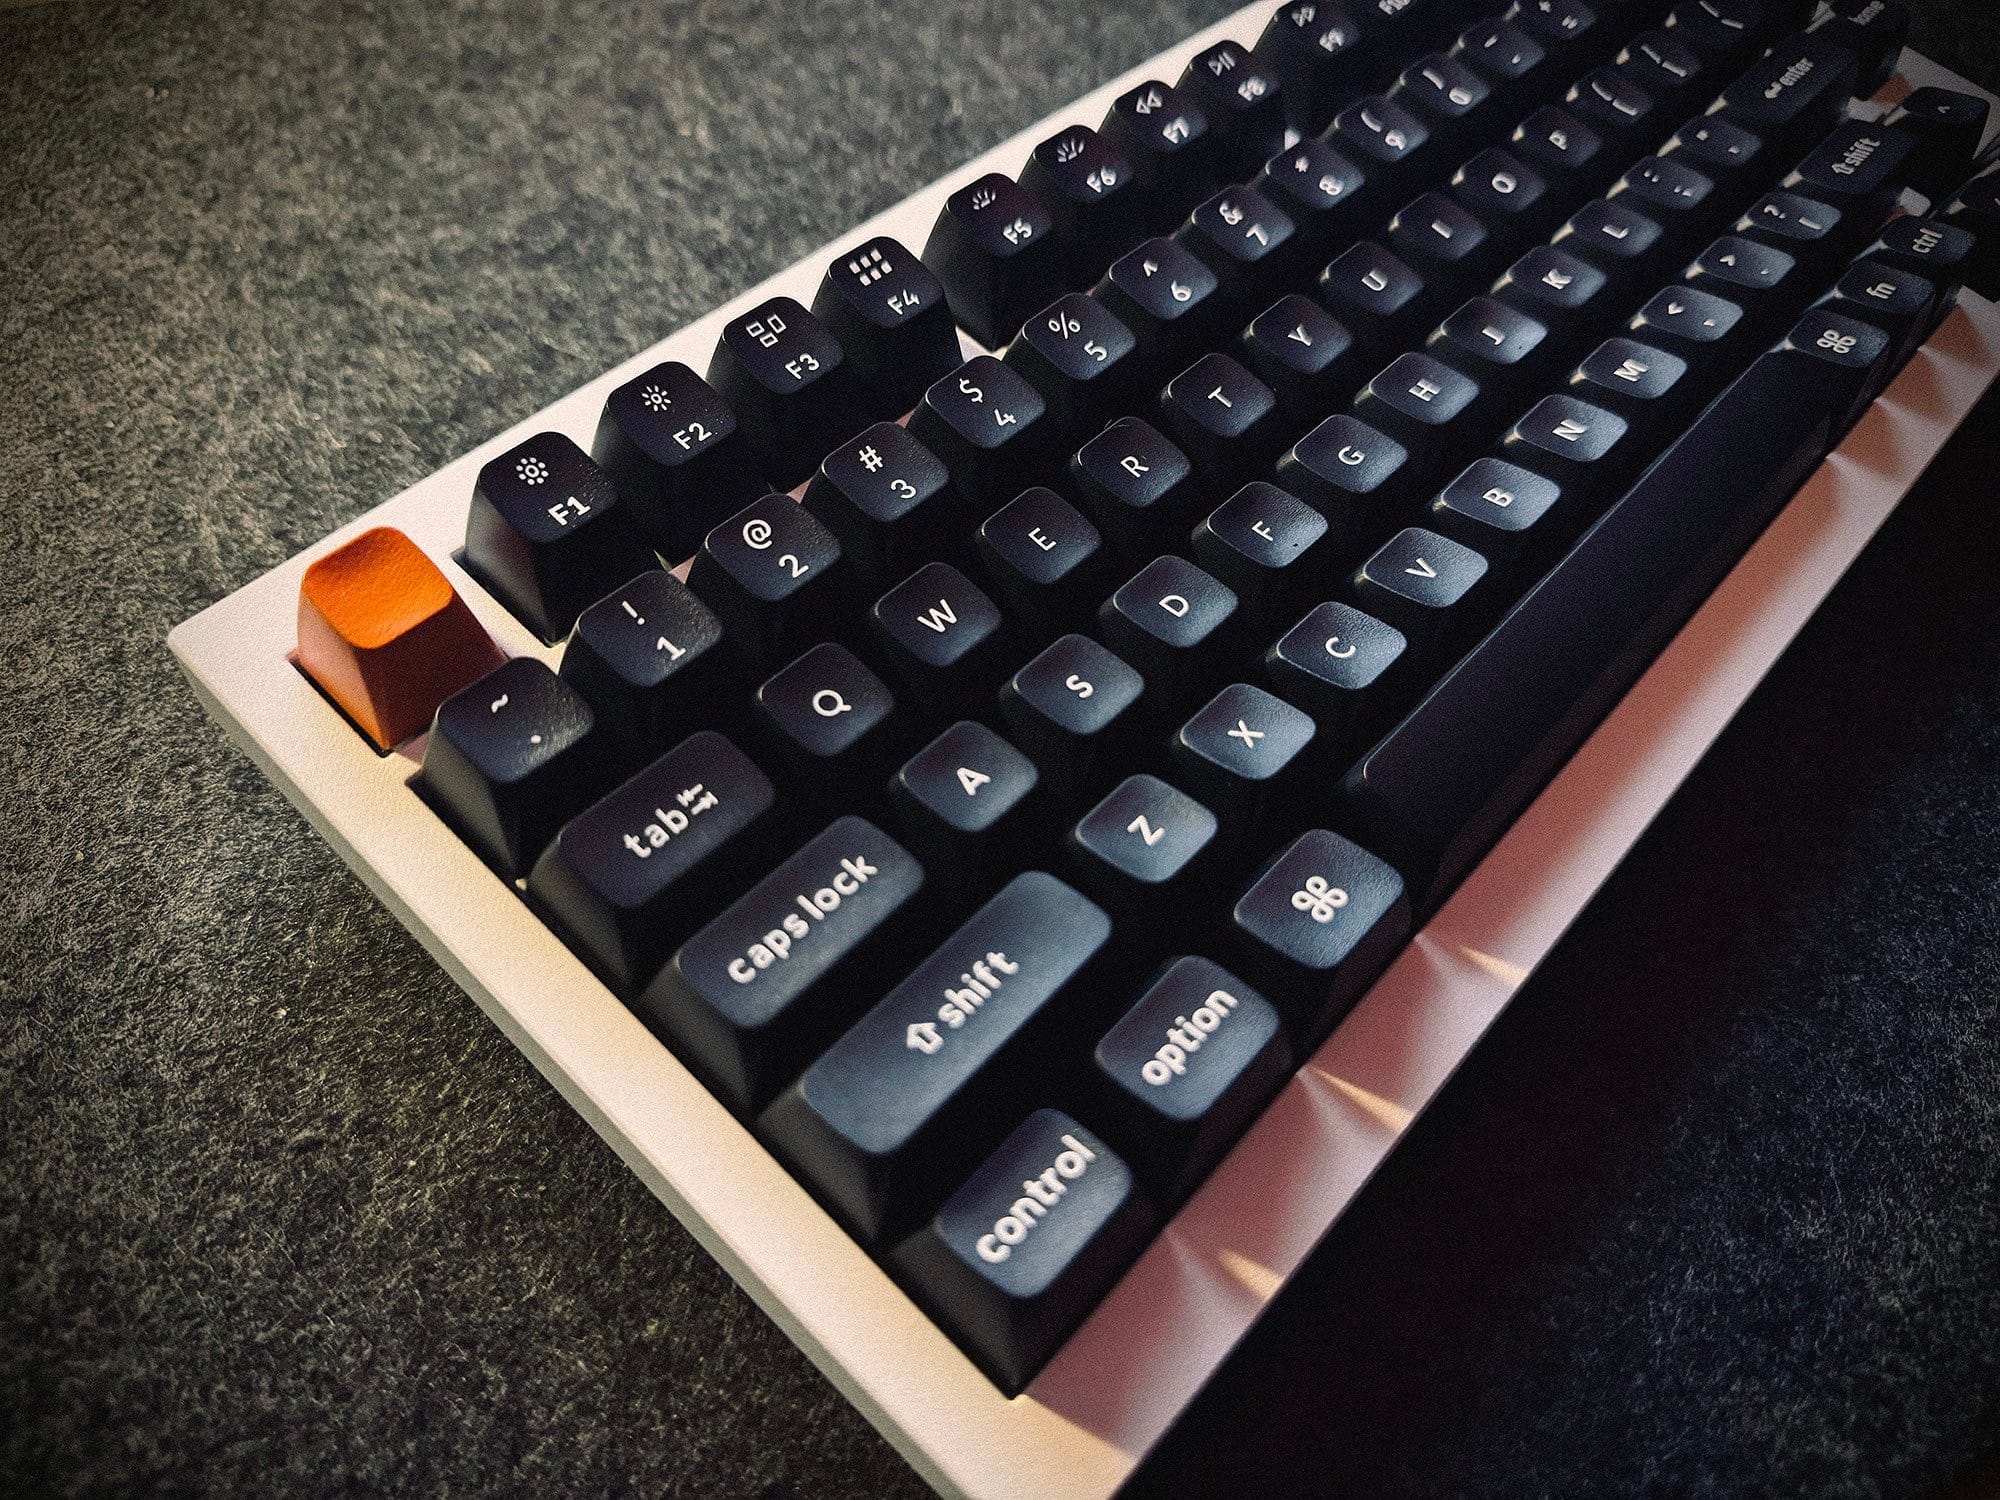 An angled view of a mechanical keyboard with black keys and a distinctive orange escape key